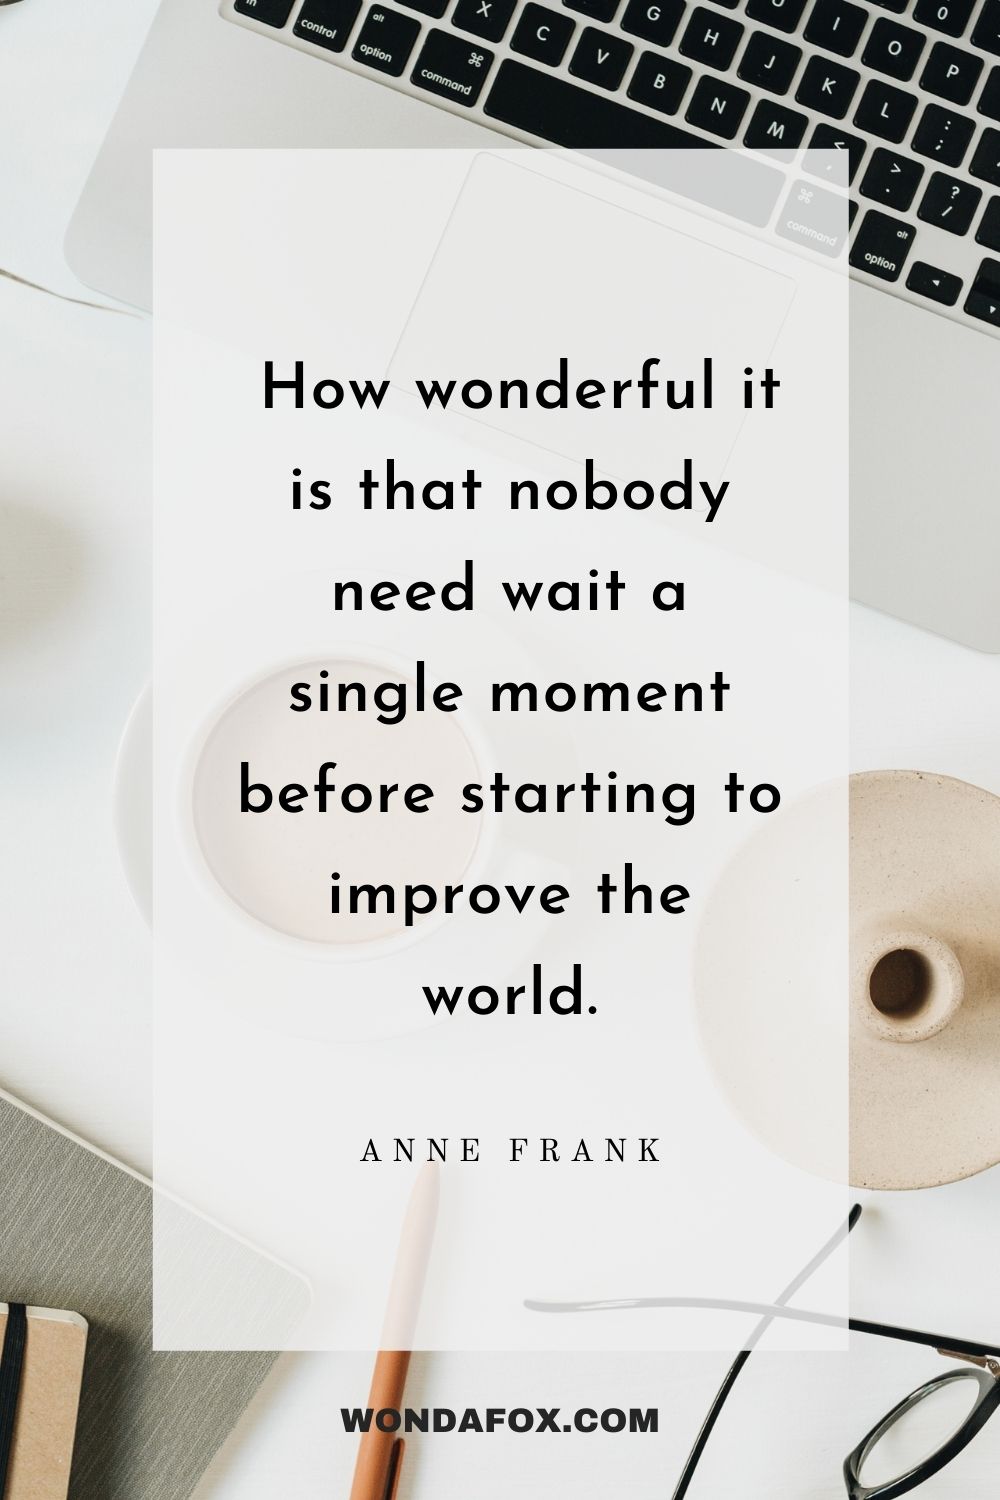  How wonderful it is that nobody need wait a single moment before starting to improve the world.